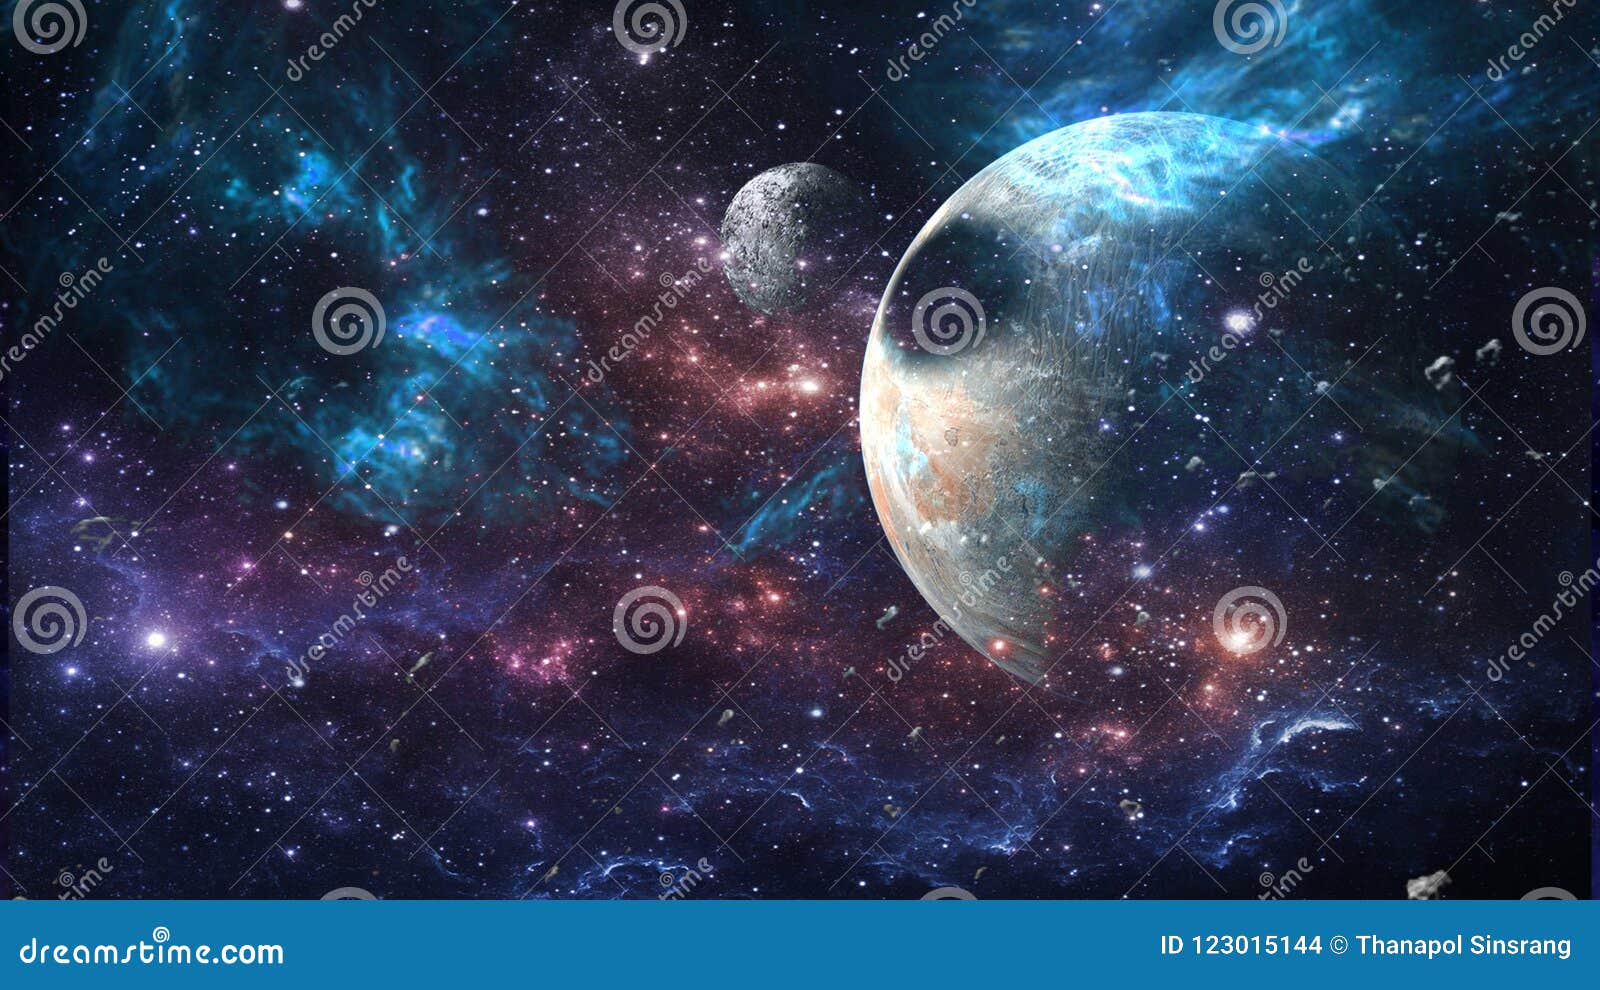 planets and galaxy, science fiction wallpaper. beauty of deep space.